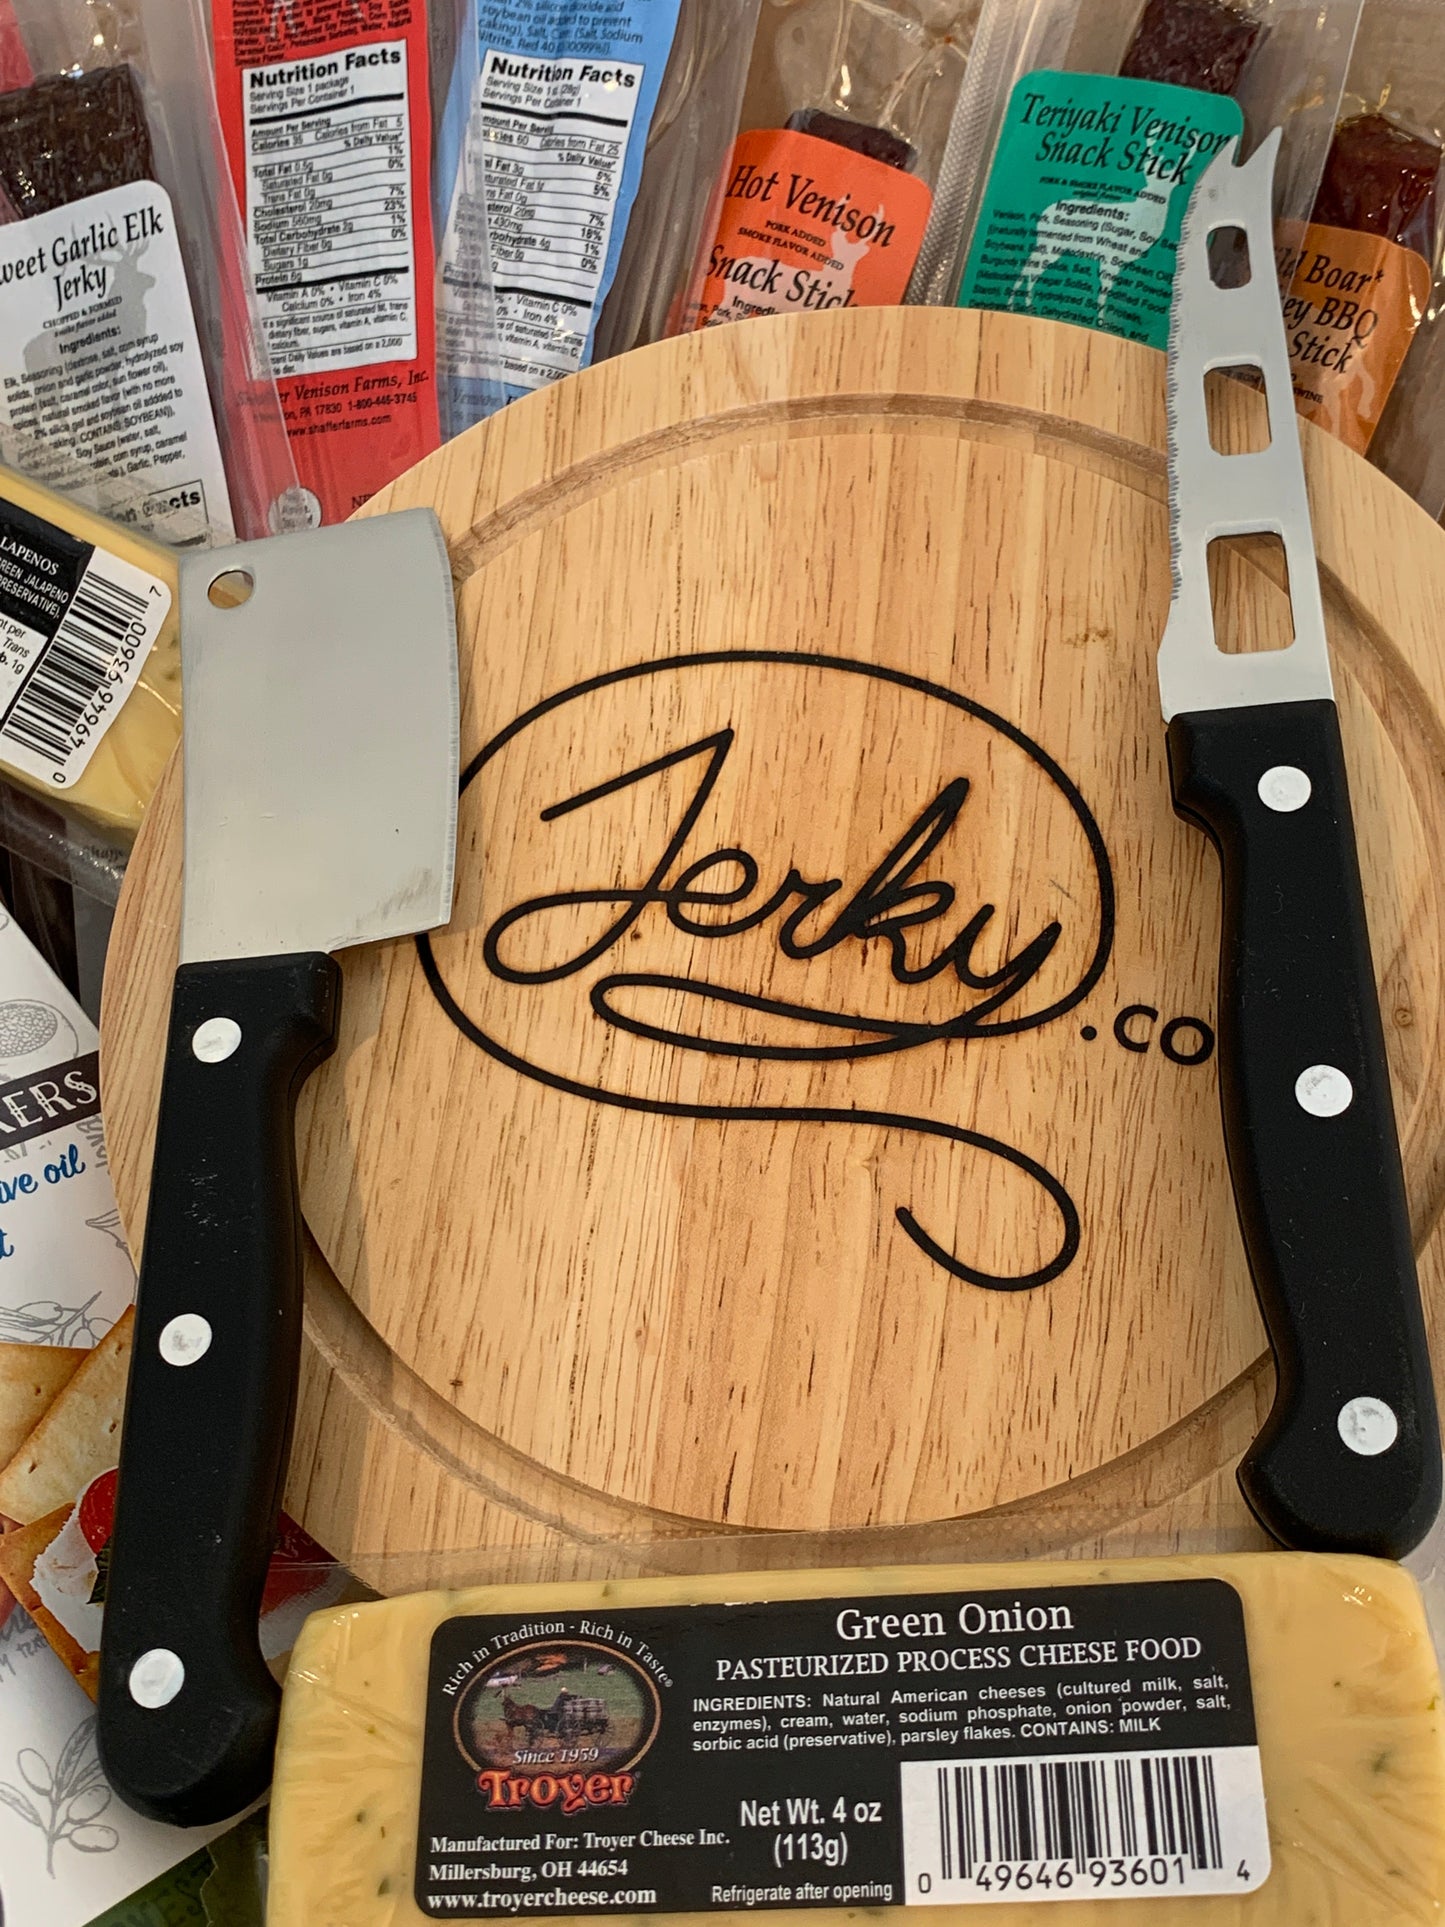 Exotic Meat & Cheese with Crackers Gift Set with Cutting Board and Knife Set - 16 piece set by Jerky.com